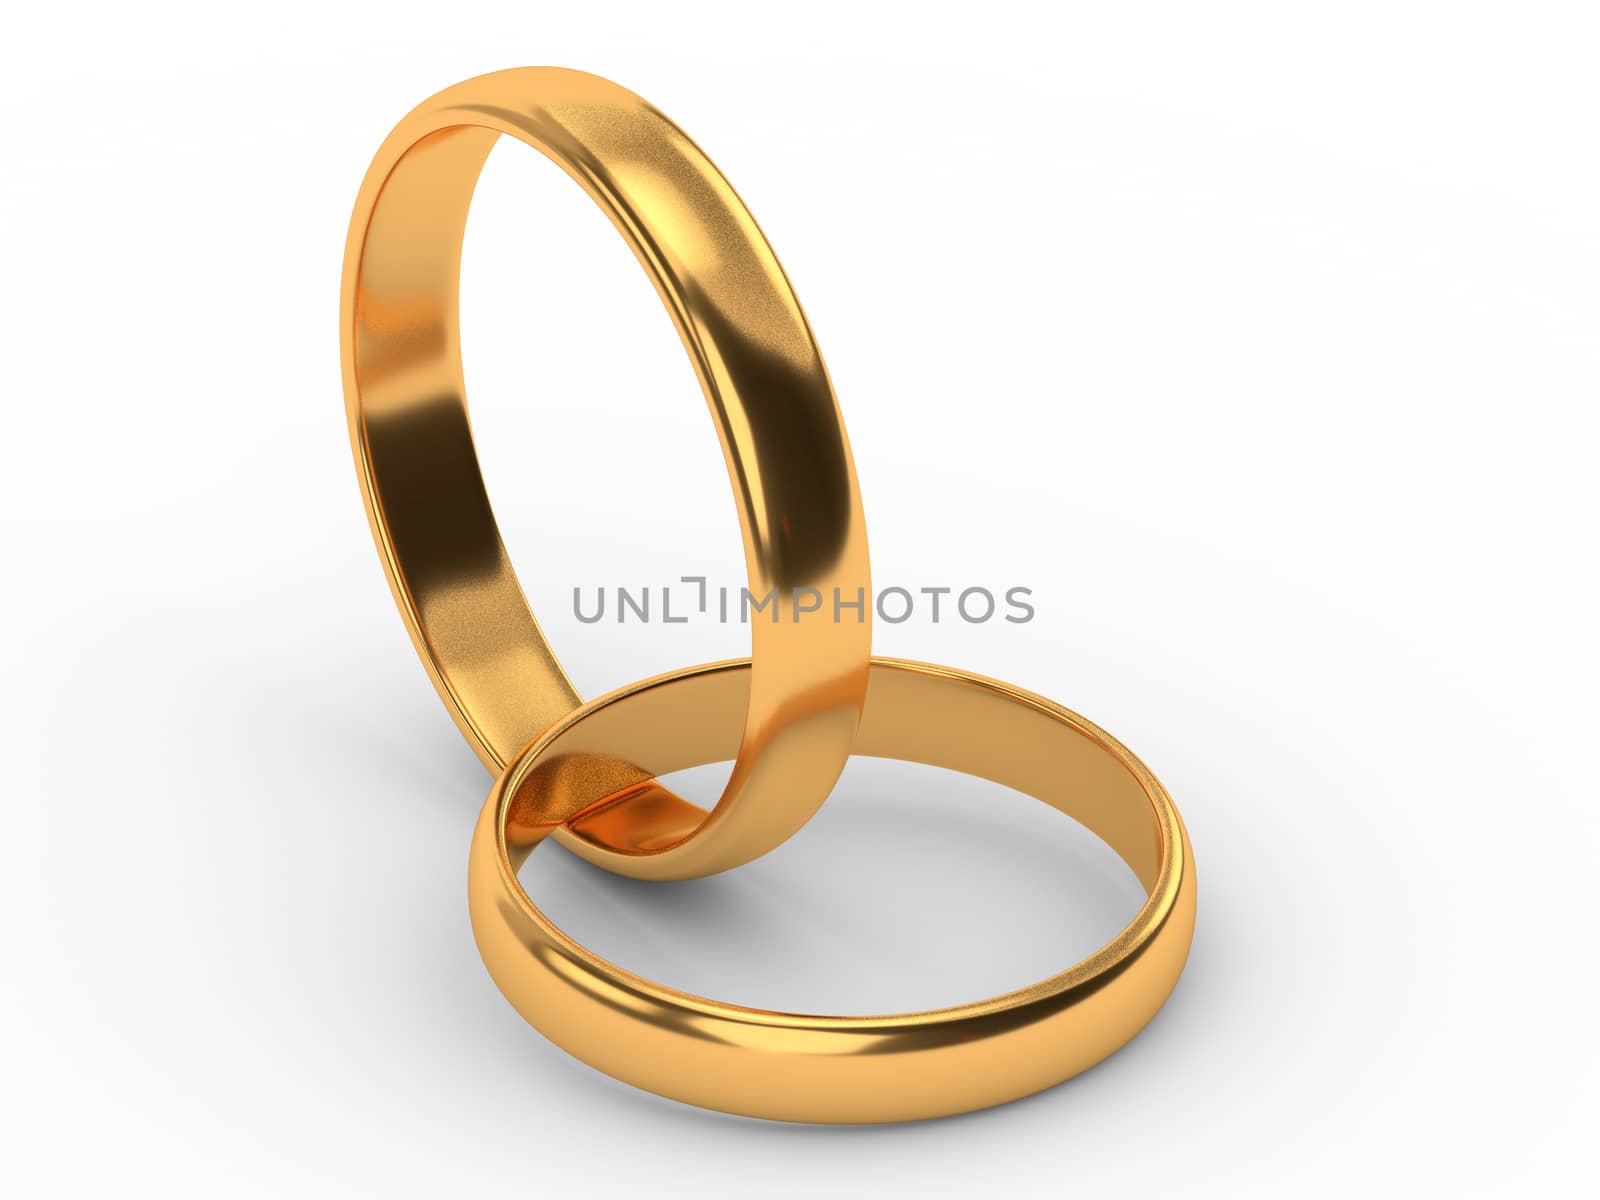 Connected gold wedding rings isolated on white by alexkalina